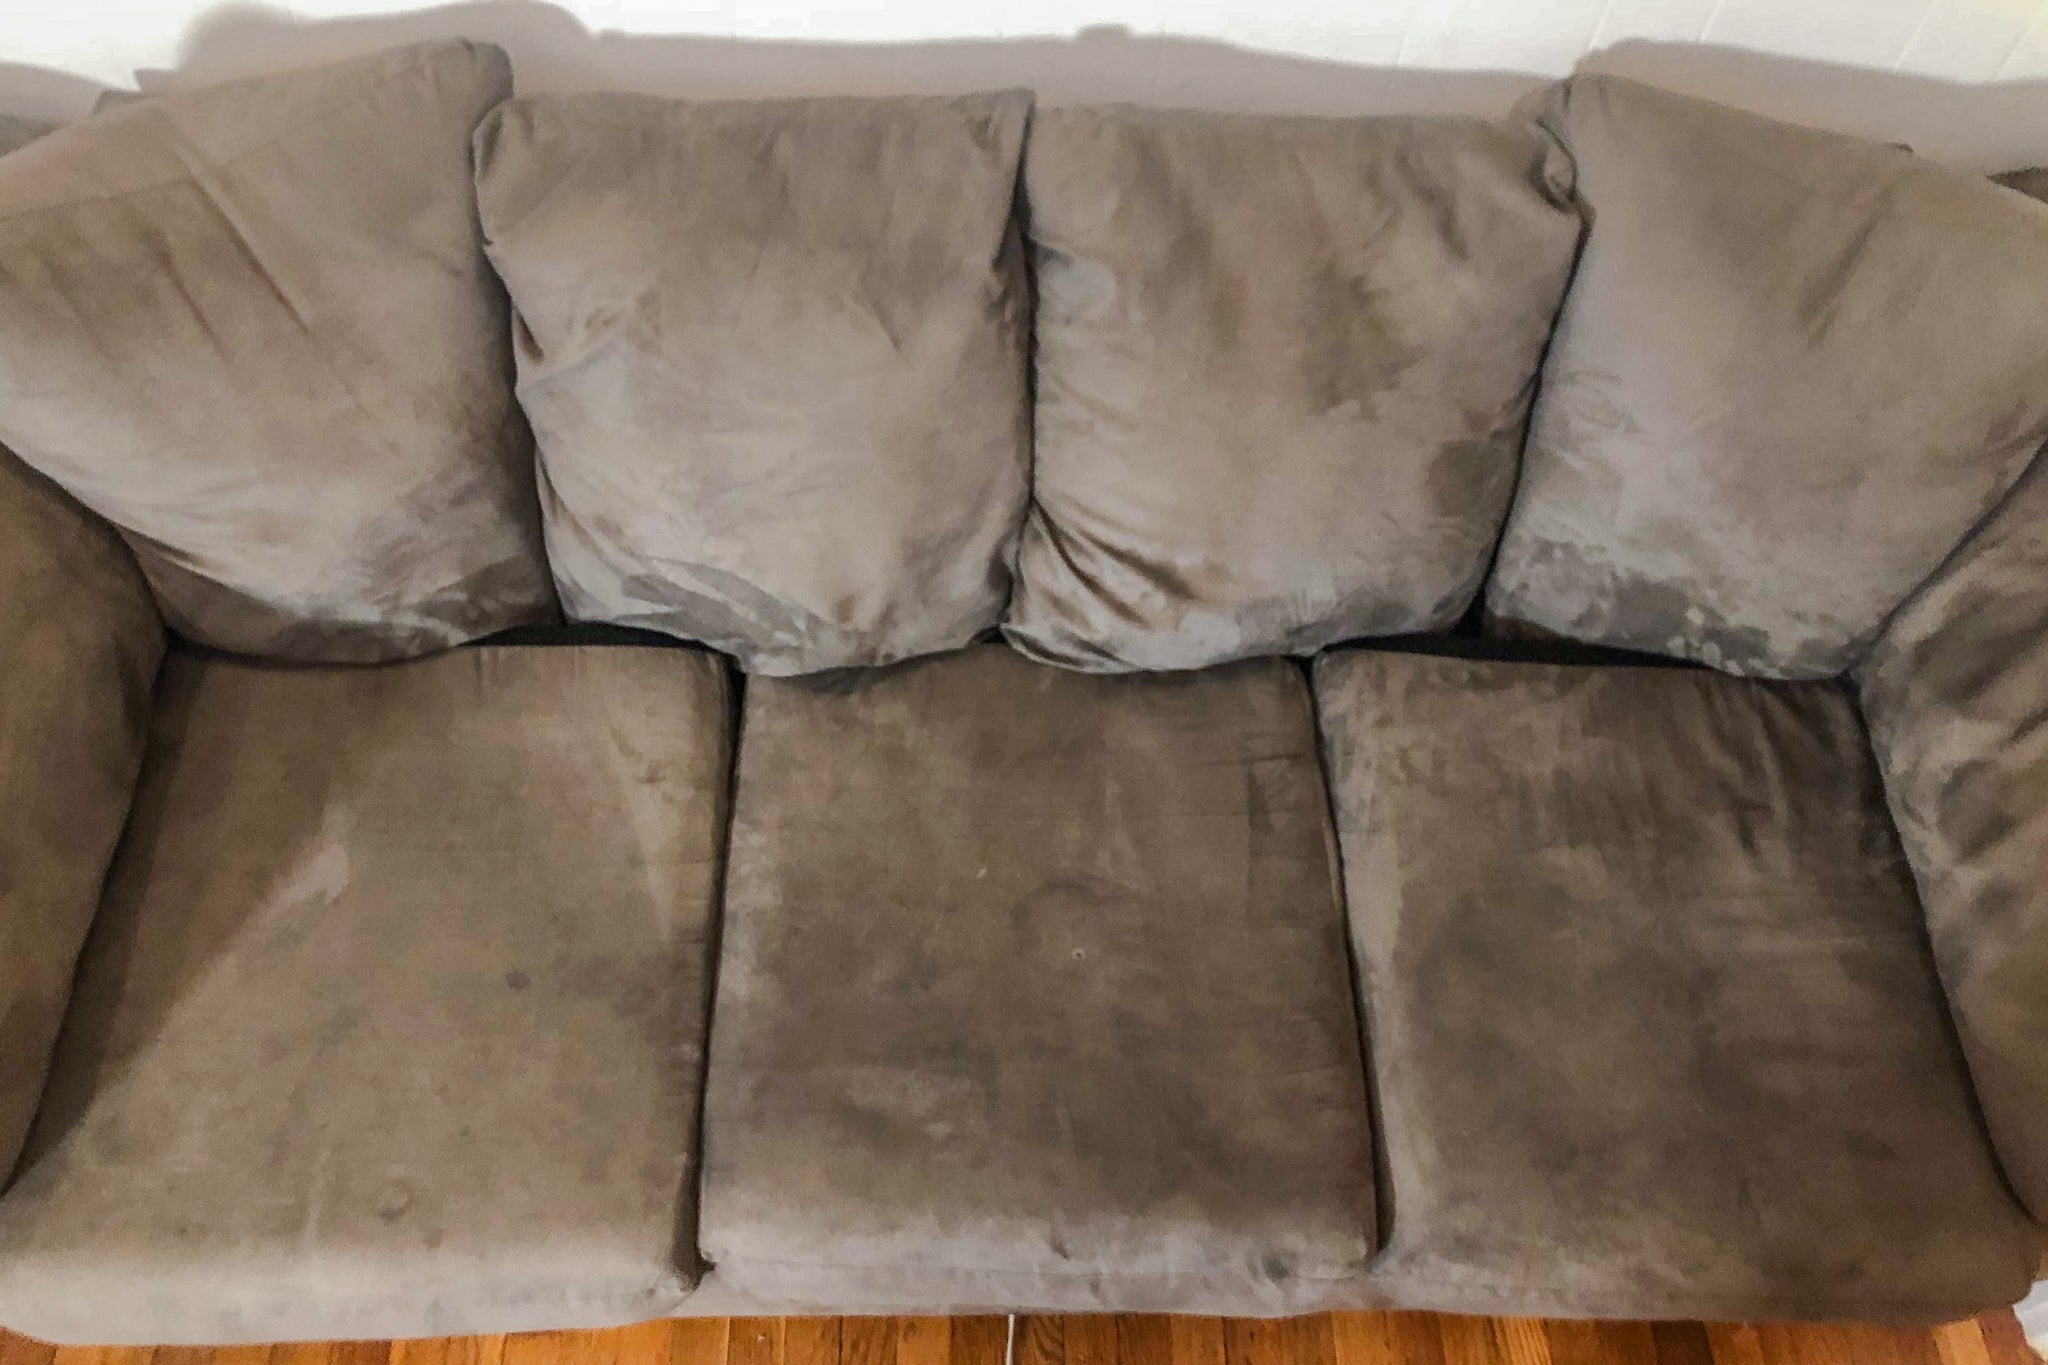 How To Clean Upholstered Furniture To Keep Your Sofa Looking Spotless